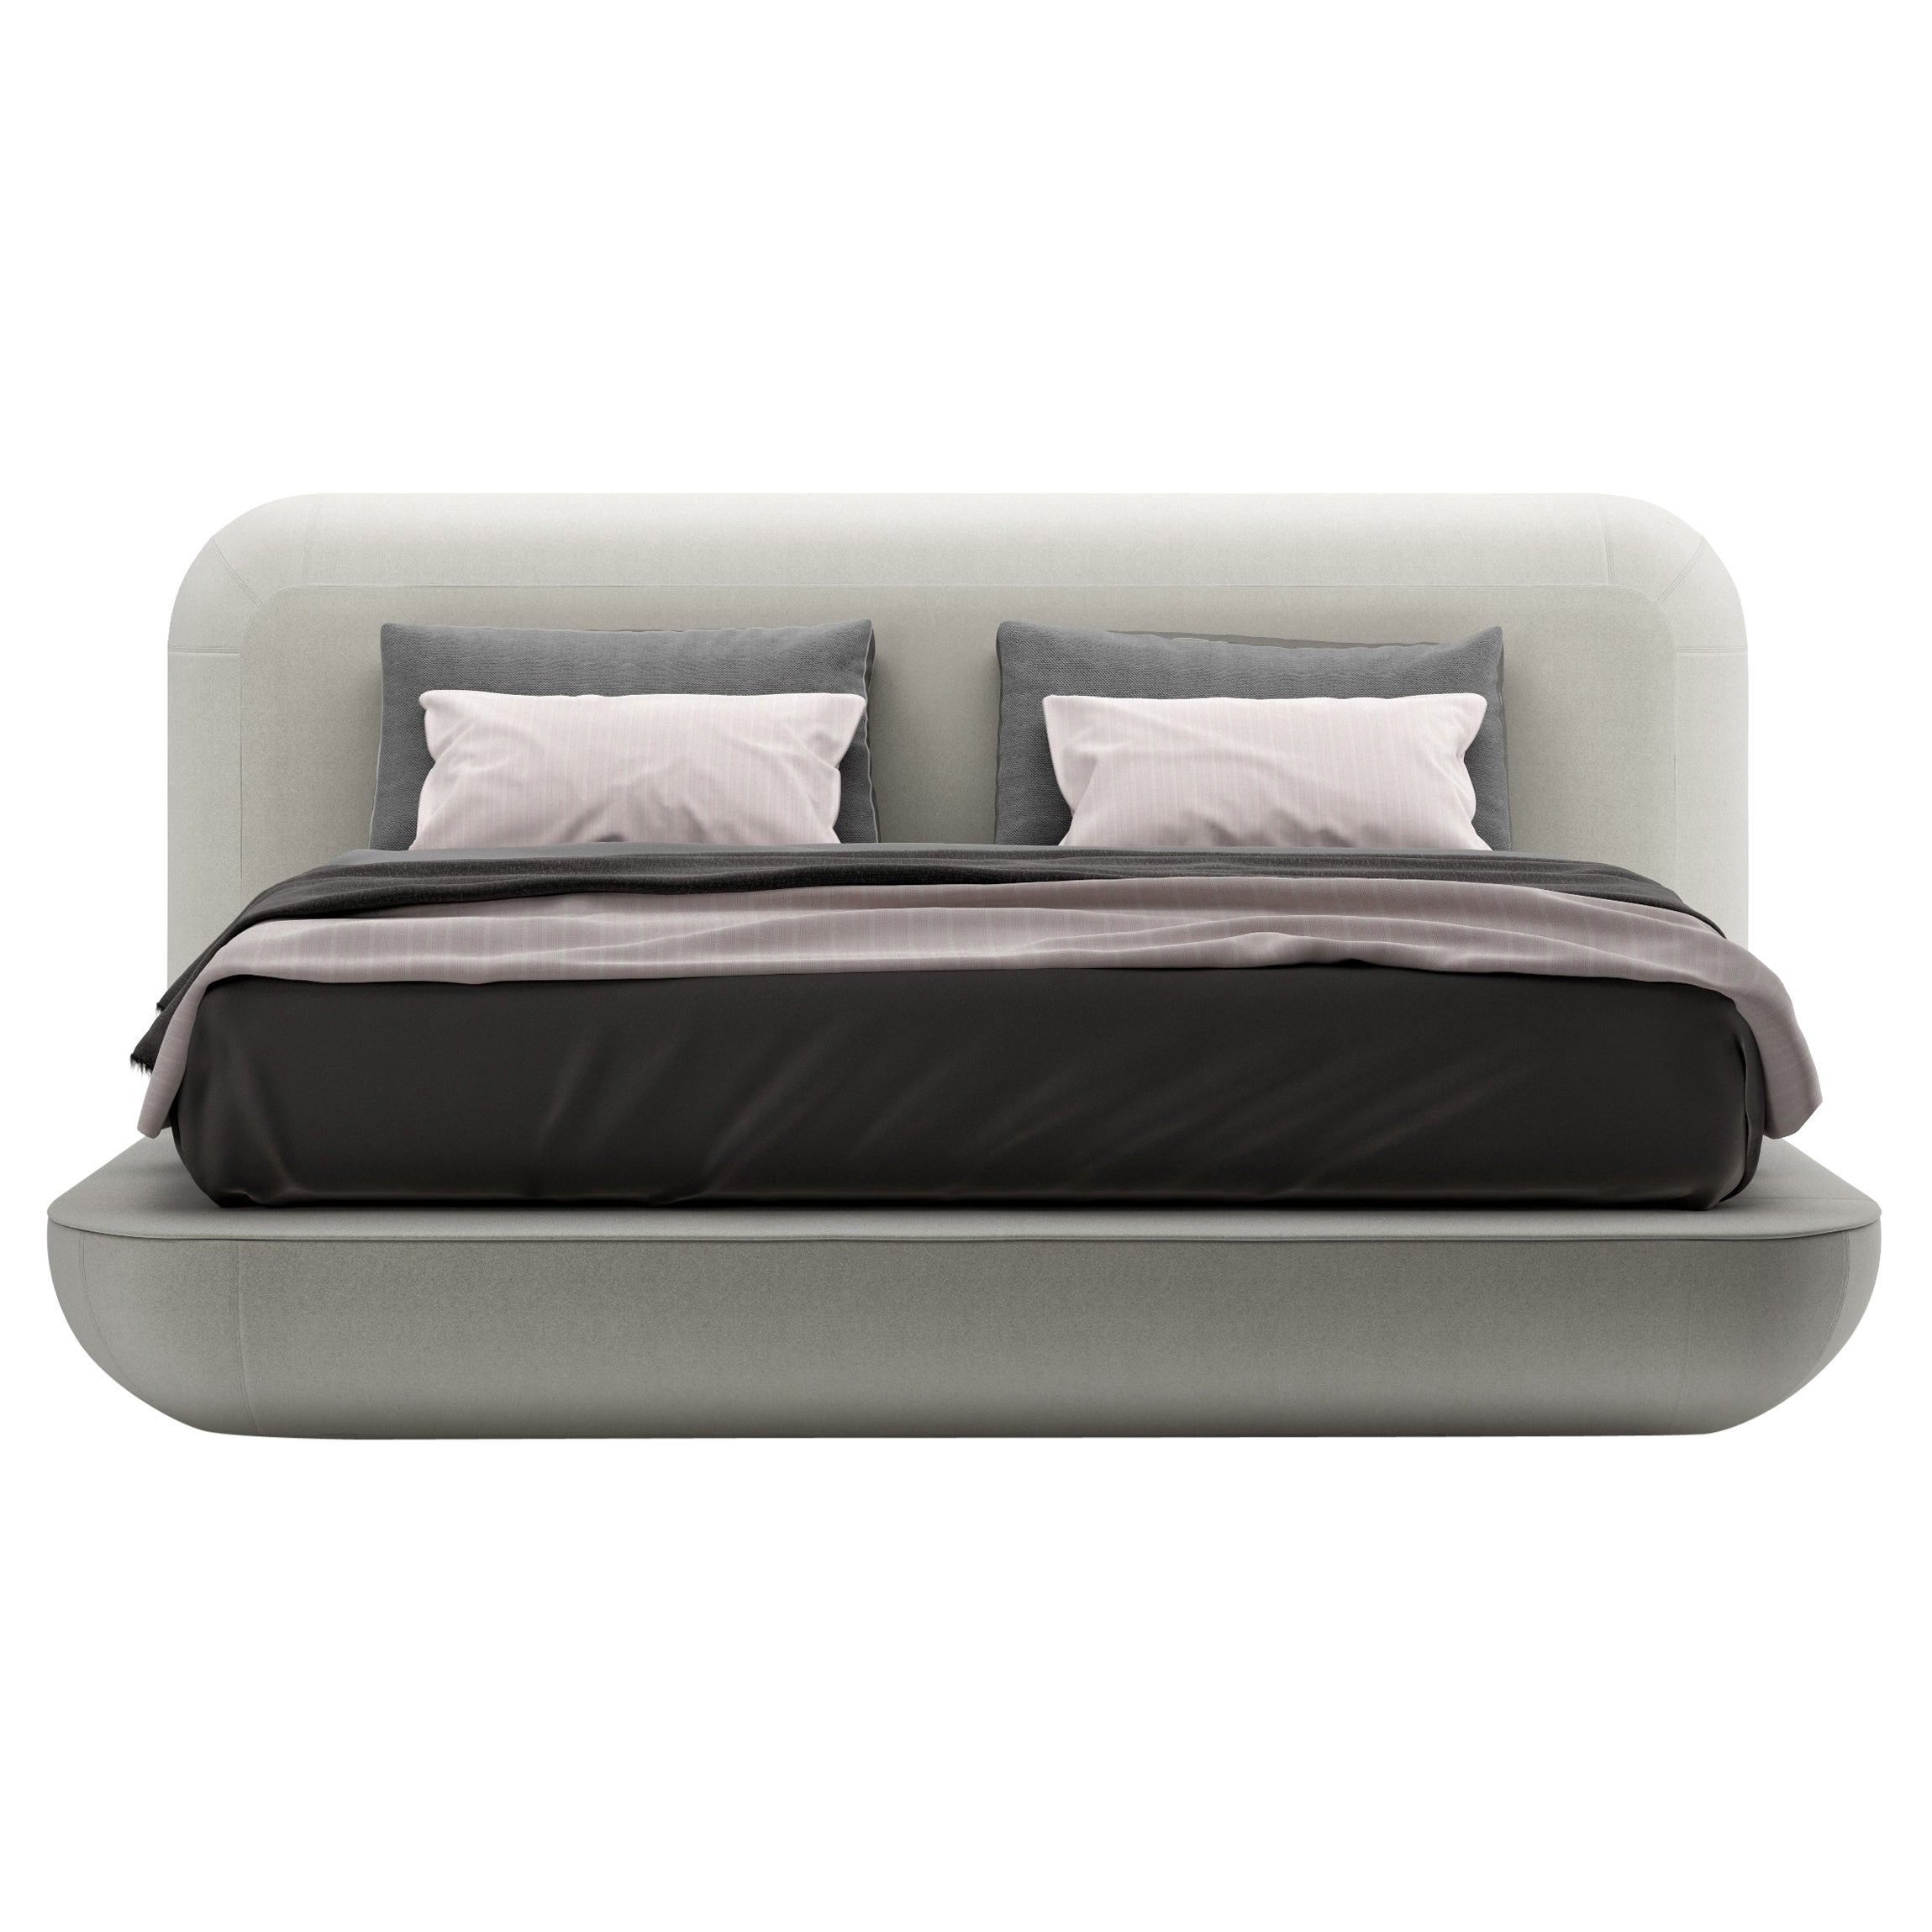 Alias 28A Large Okome Bed with Headboard Upholstered in White by Nendo